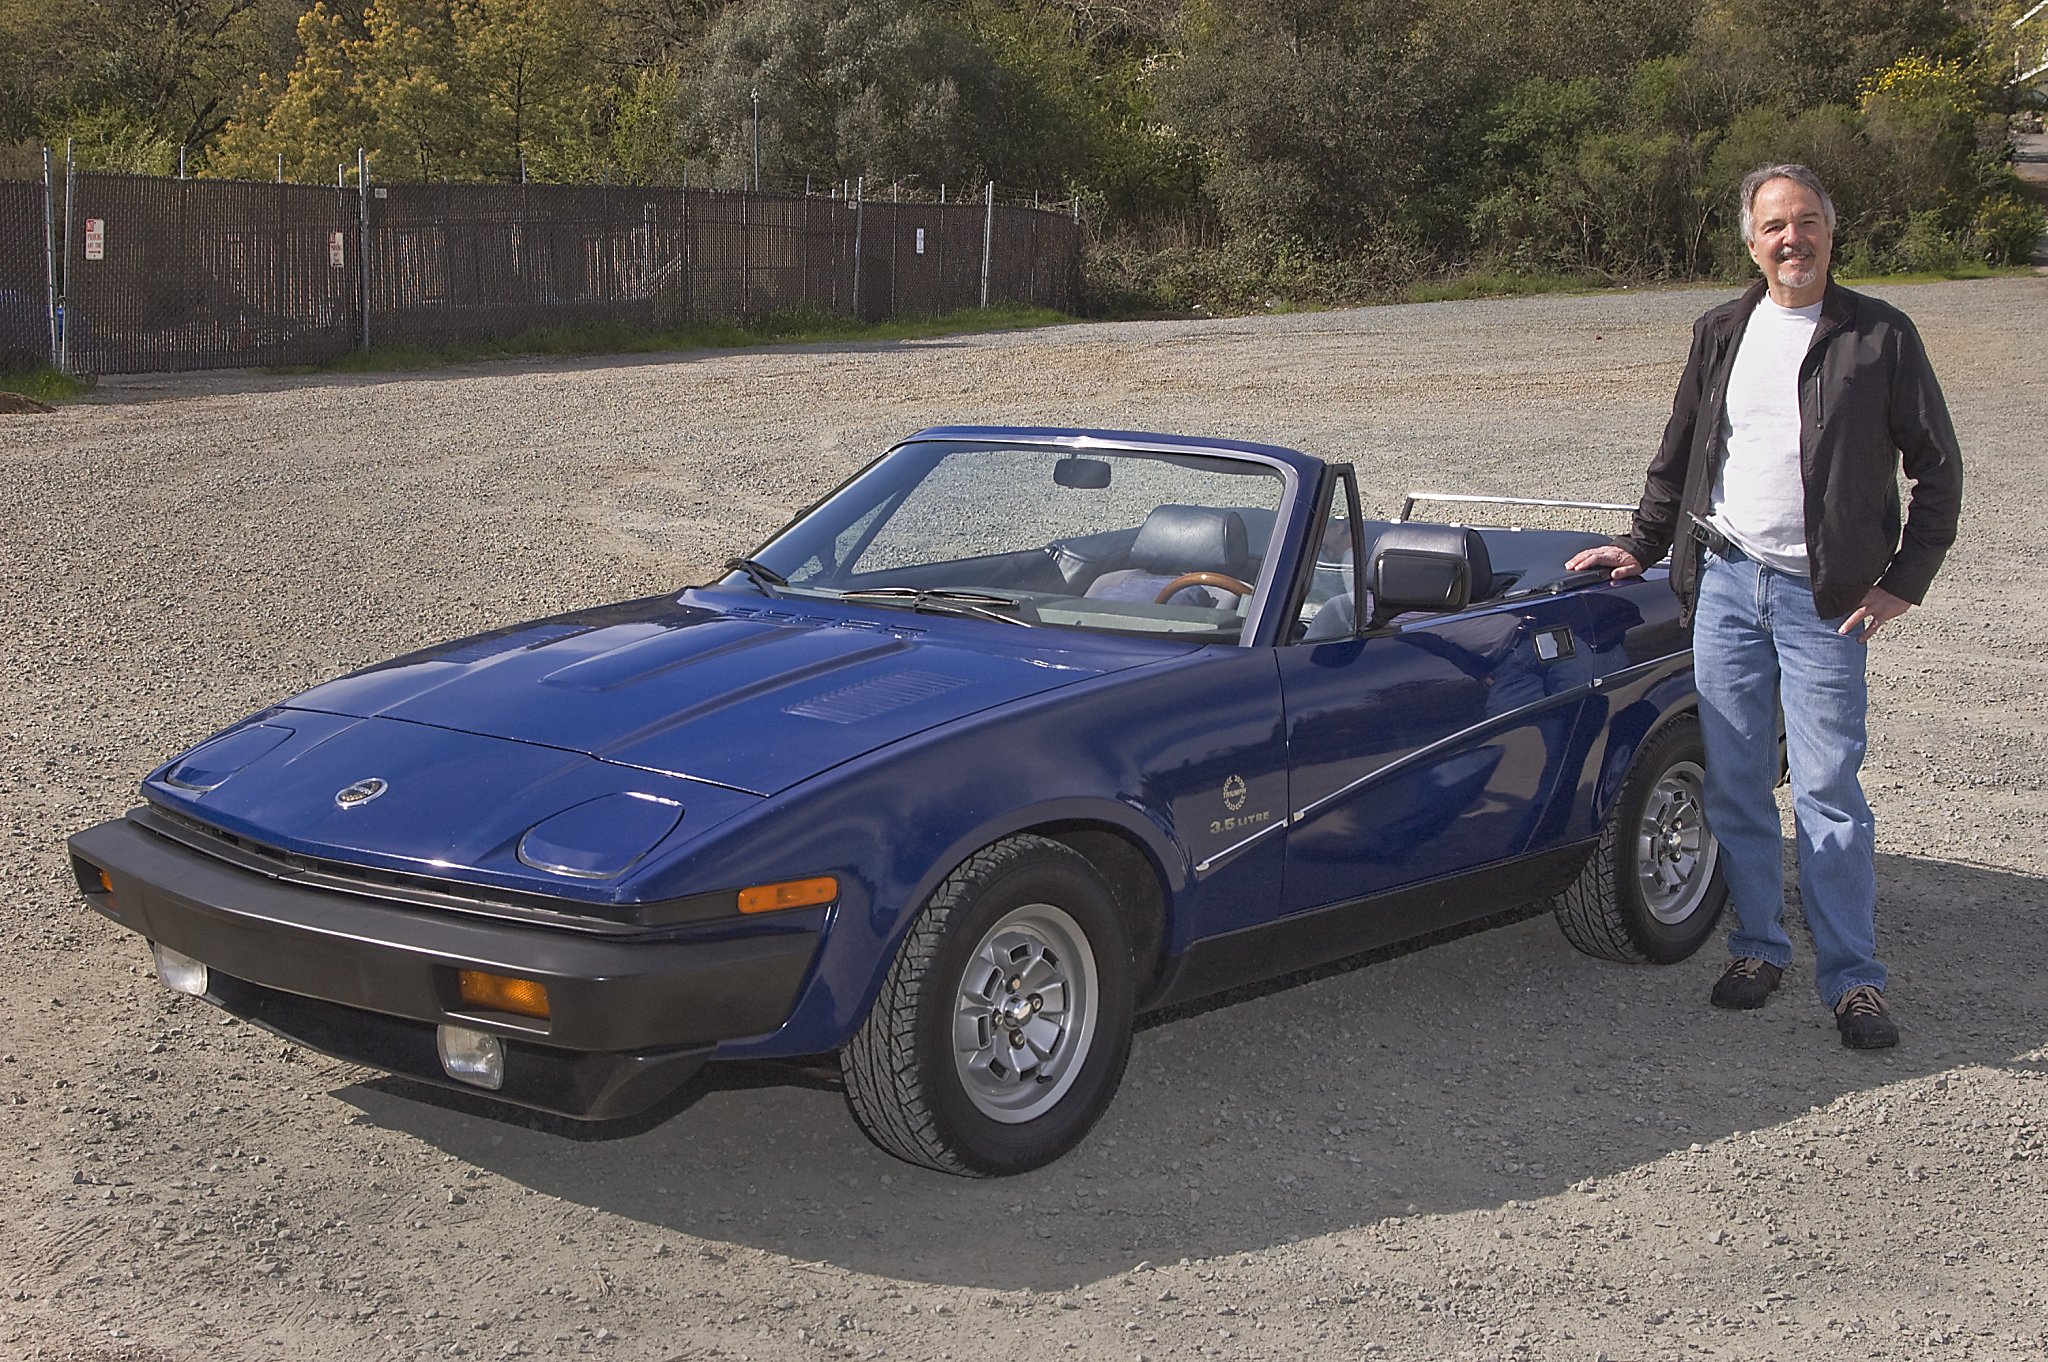 'Love at first sight' with 1981 Triumph TR8 - SFGate